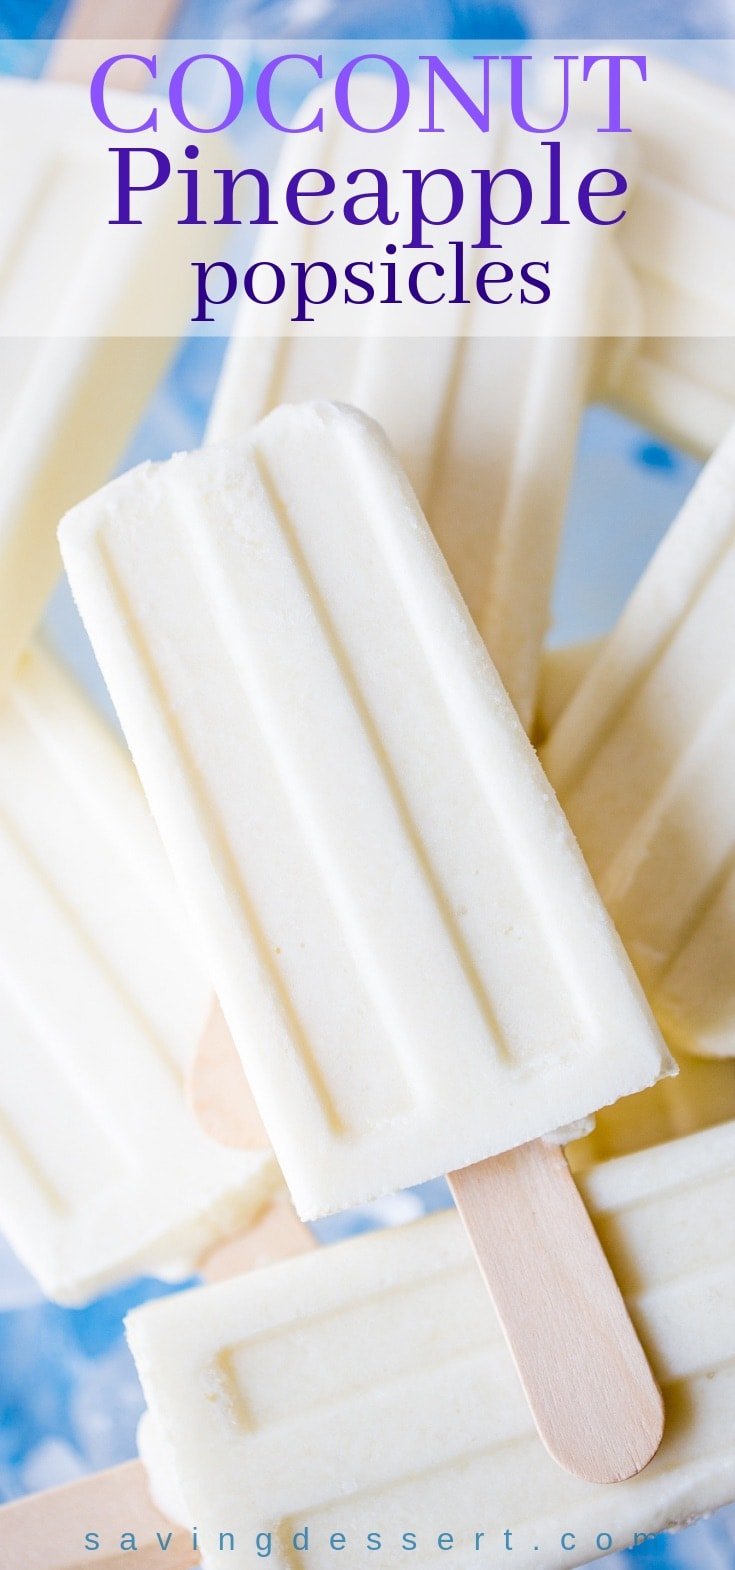 A stack of creamy white coconut pineapple popsicles